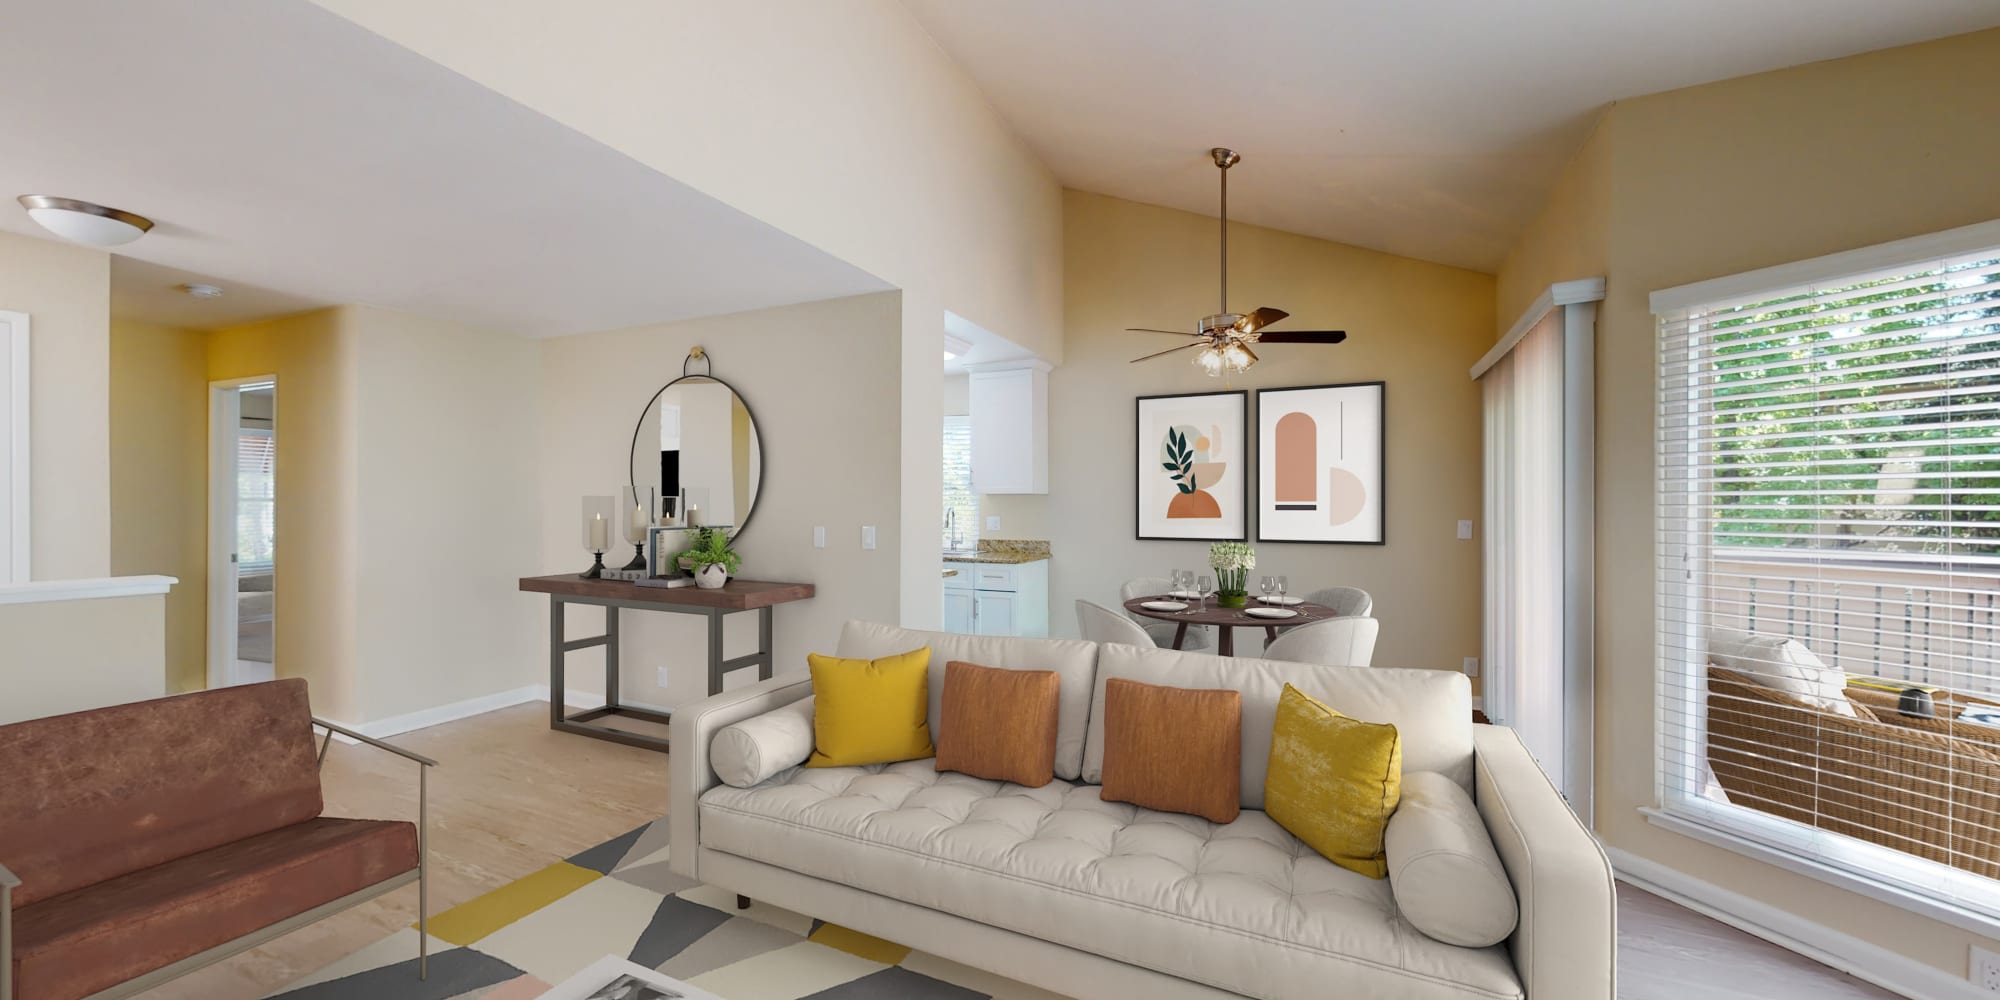 View a virtual tour of our 2 bedroom homes at Valley Plaza Villages in Pleasanton, California